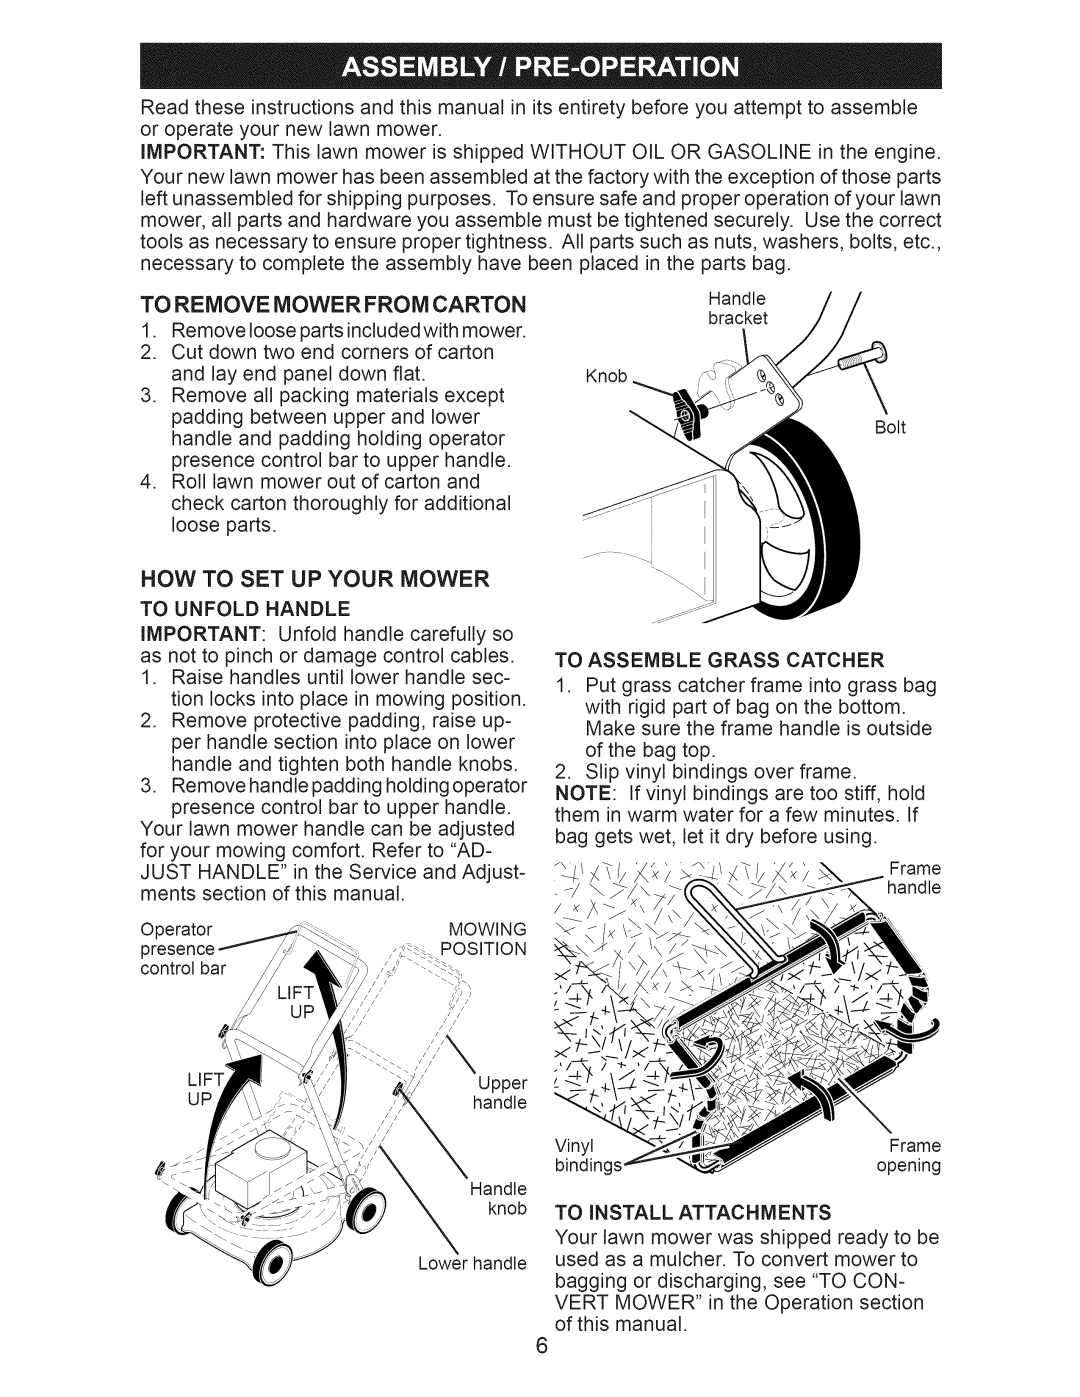 Craftsman 917.376230 manual To Remove Mower From Carton, Now To Set Up Your Mower 